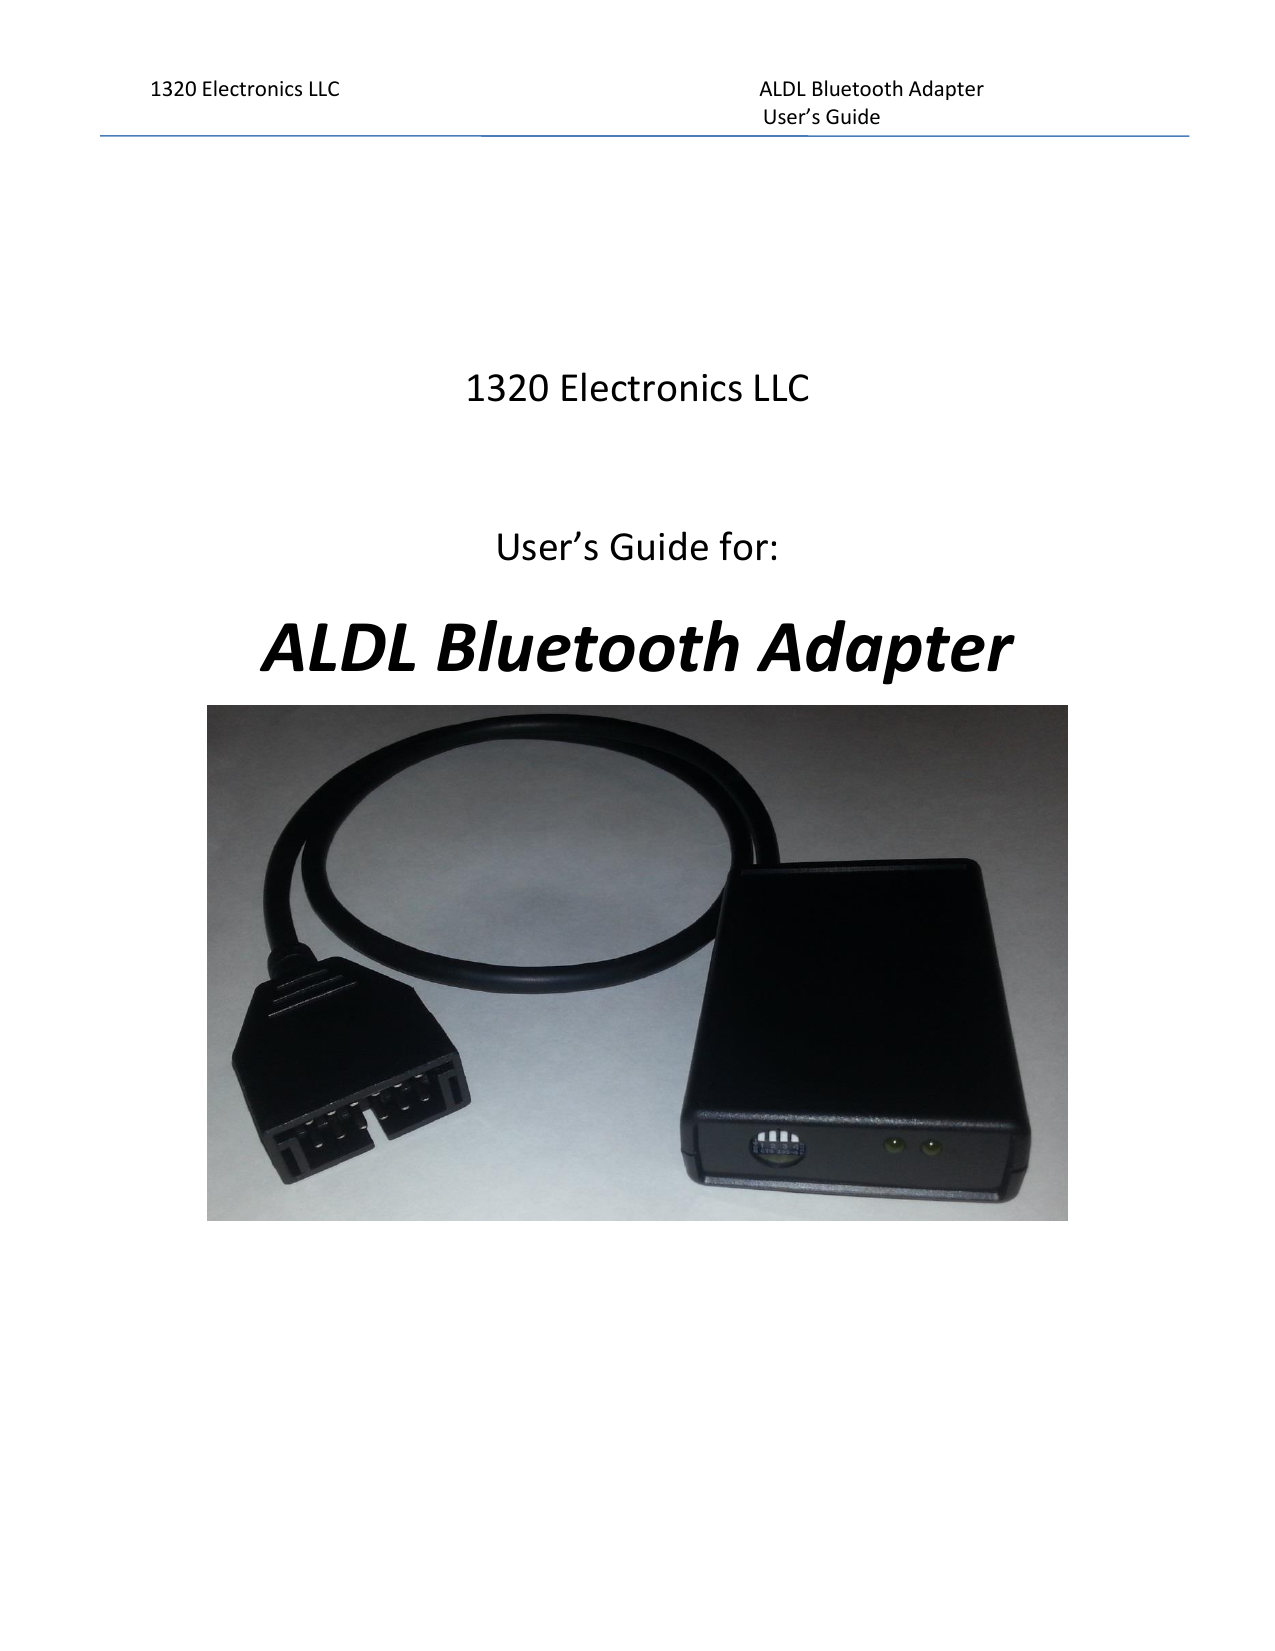 aldl to usb cable